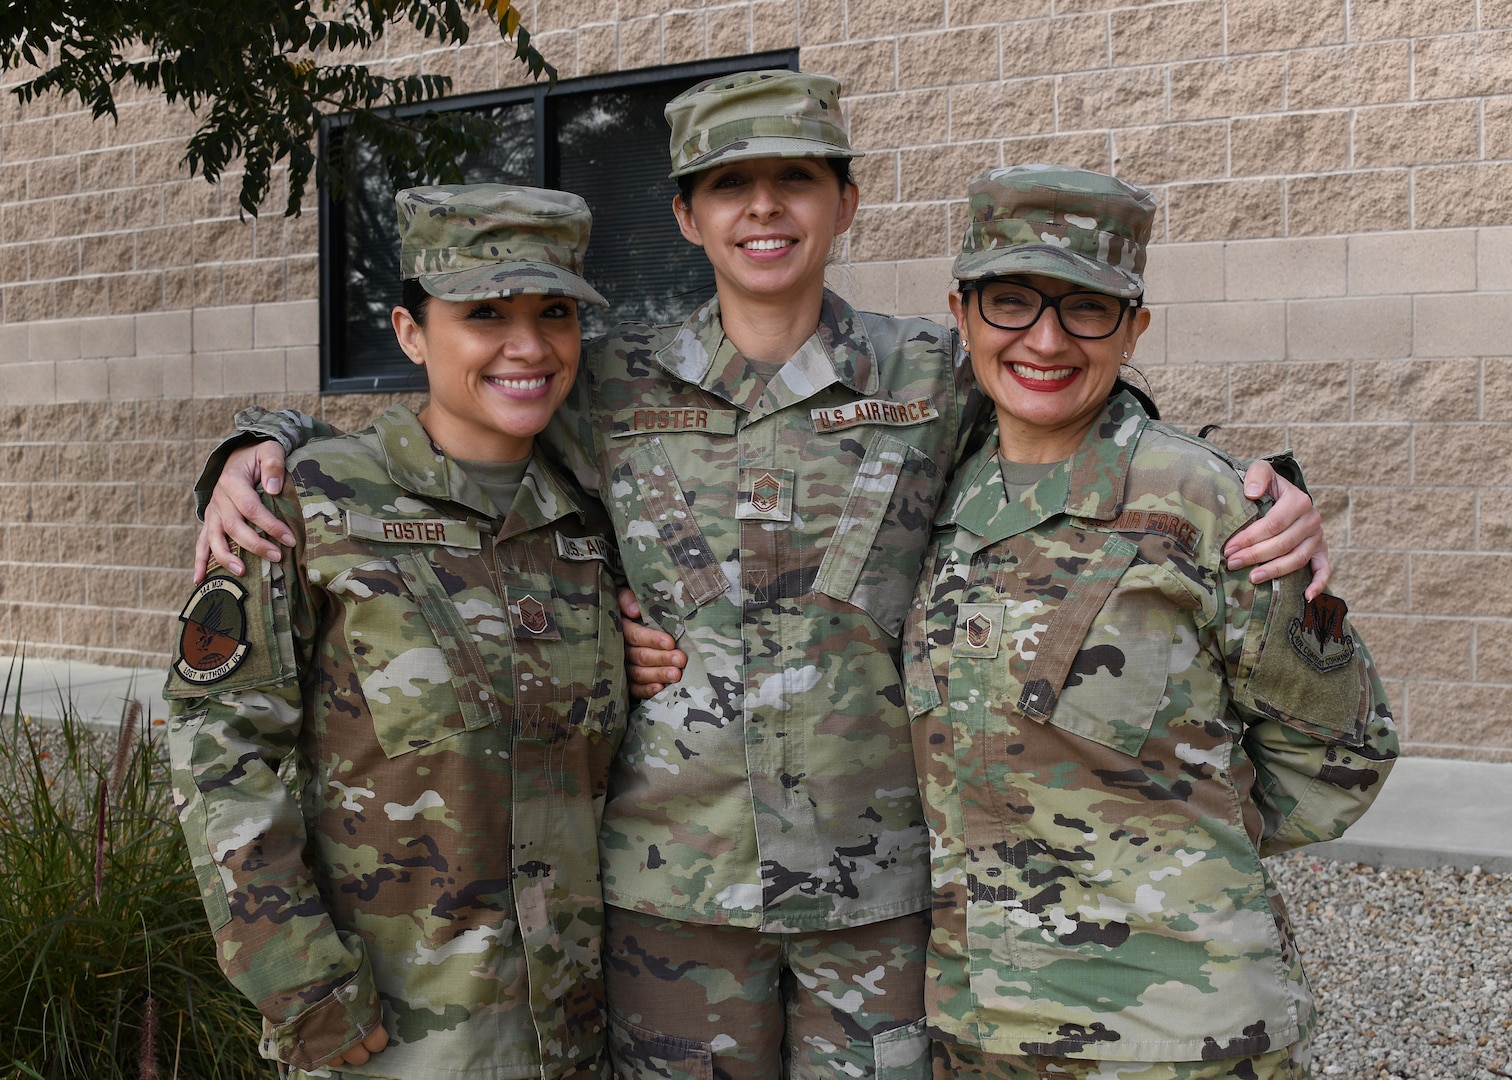 From left, U.S. Air Force Master Sgt. Lindsay Foster, 144th Maintenance Squadron unit deployment manager, Chief Master Sgt. Diana Foster, 144th Force Support Squadron superintendent, and Master Sgt. Elida Foster, 144th Medical Group dental assistant, at the Fresno Air National Guard Base, Calif., Nov. 5, 2021. The Foster sisters have served at the 144th Fighter Wing since 2008.